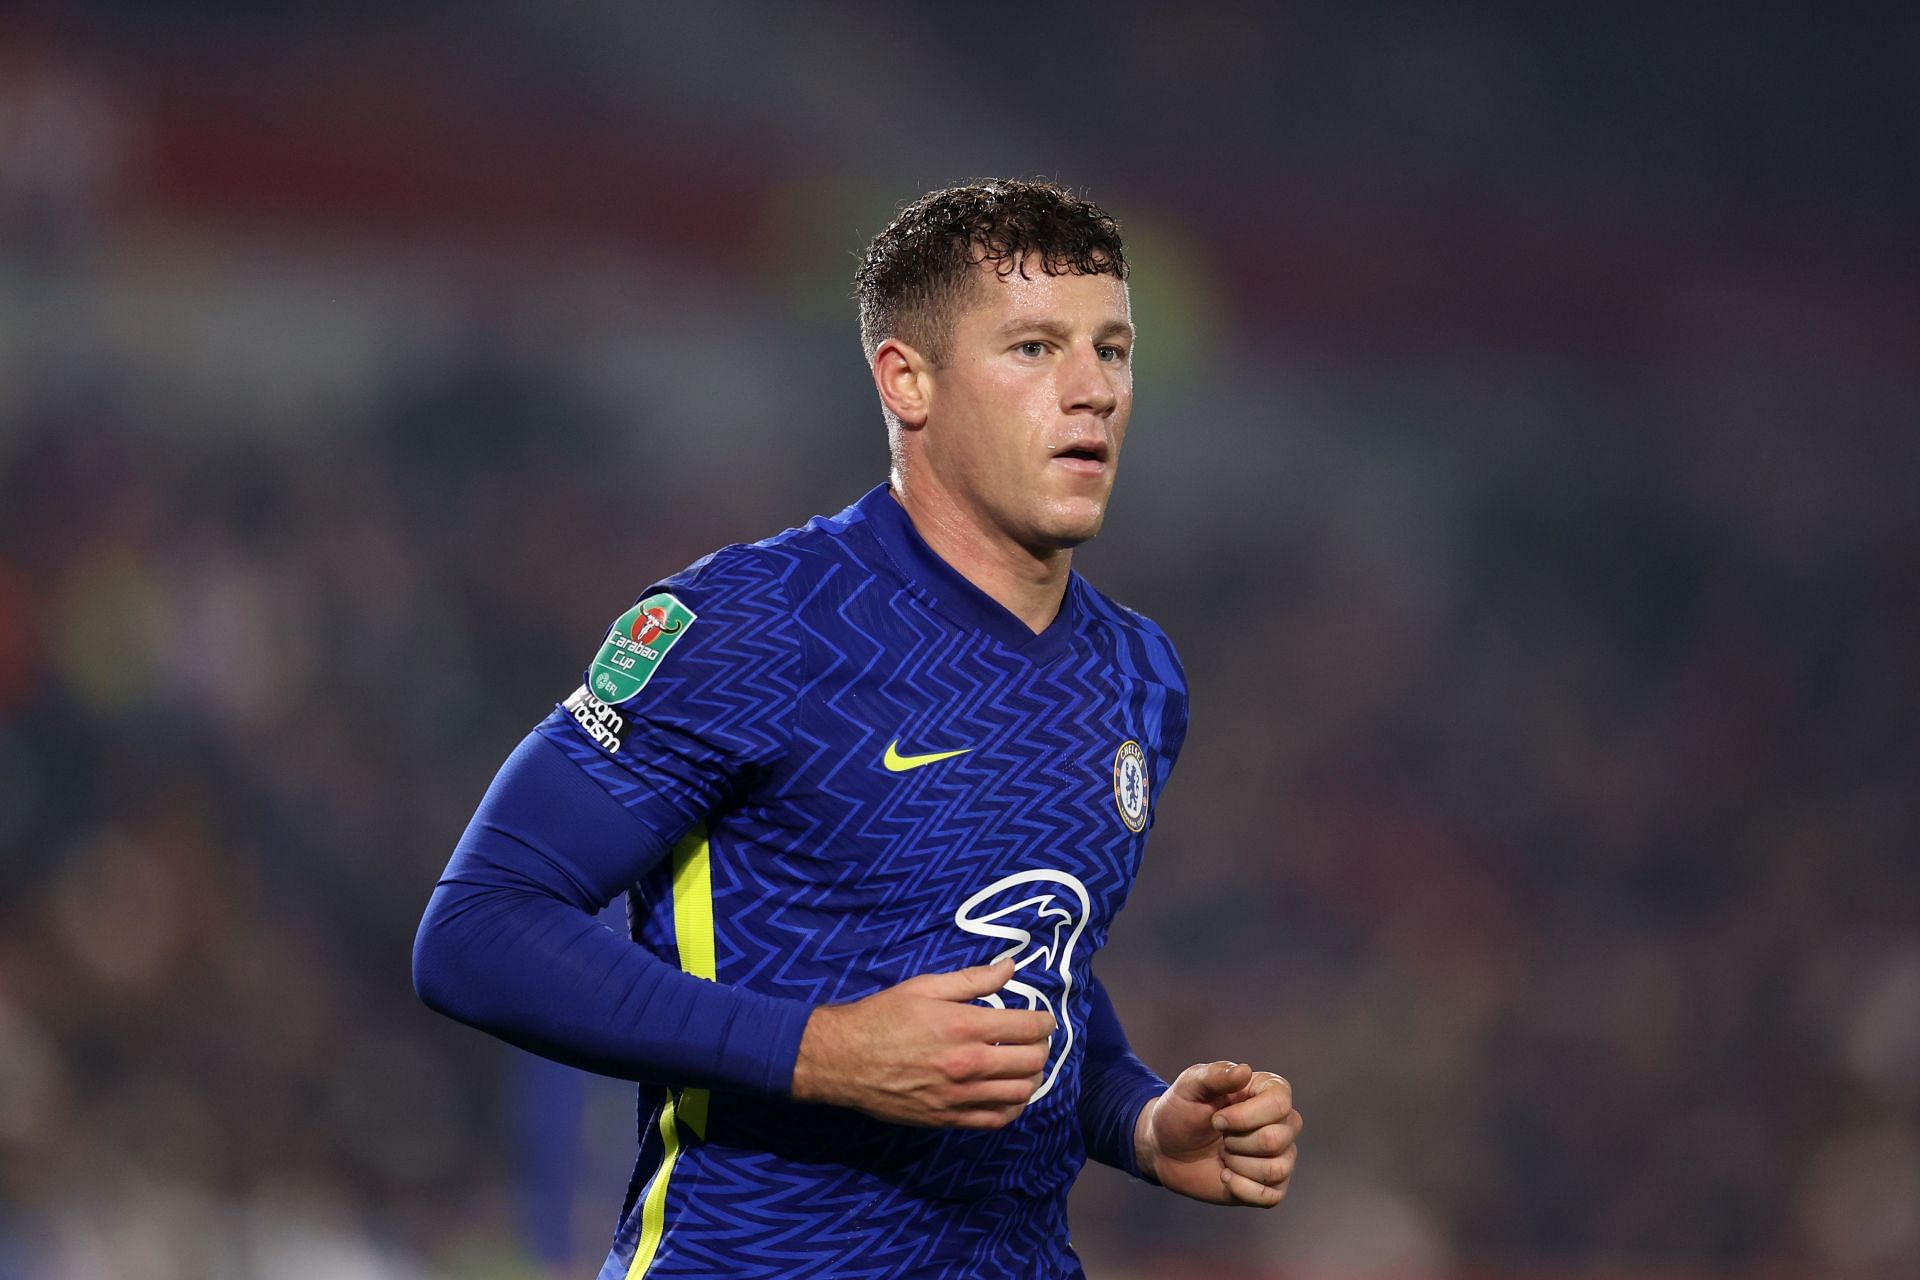 Ross Barkley should be sold in the summer.